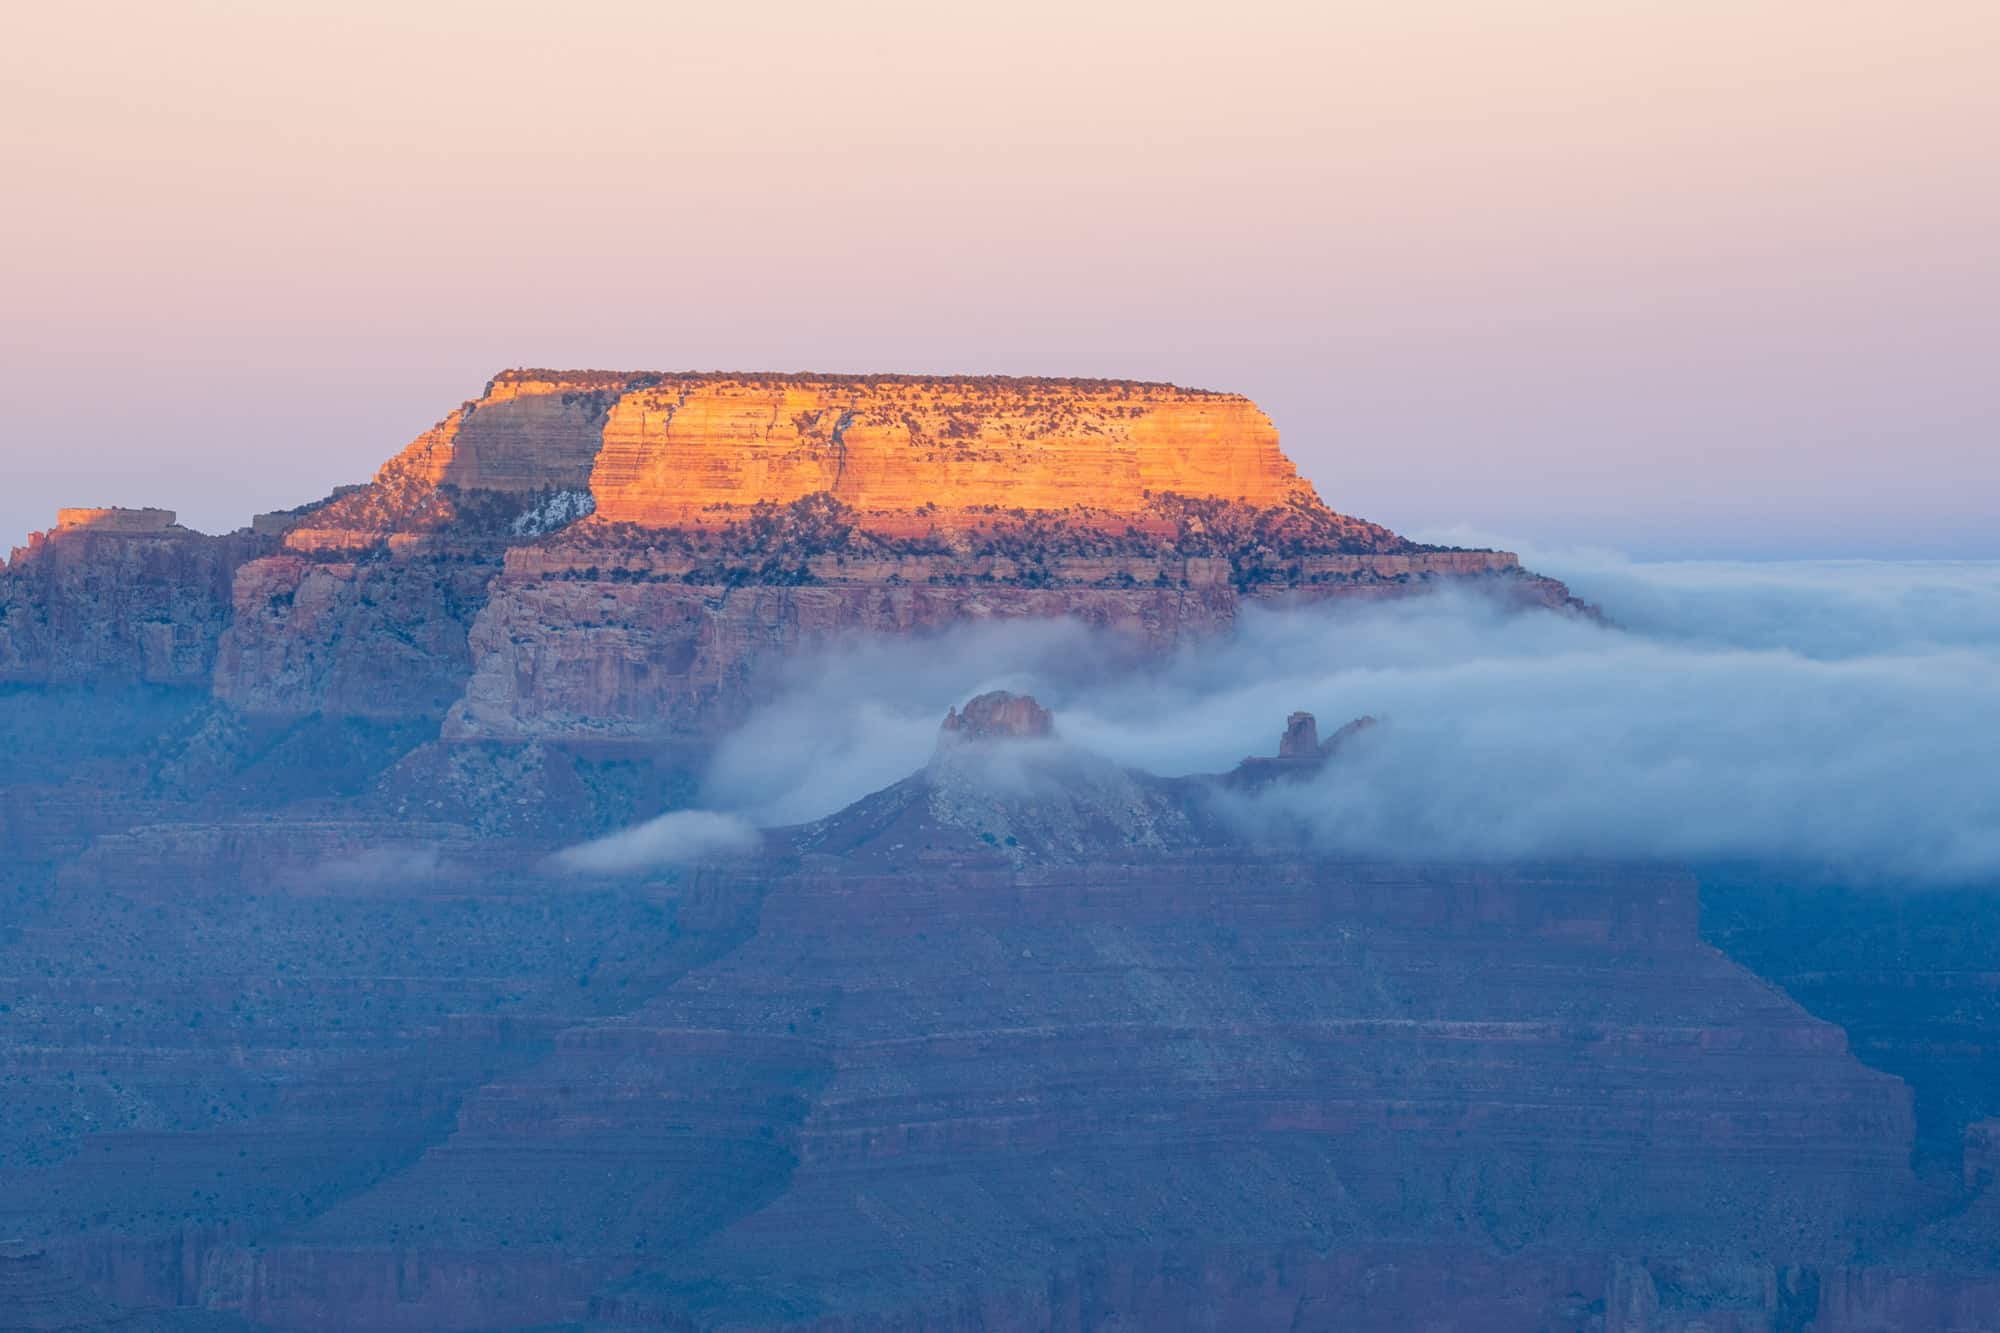 photographing the grand canyon at sunset shows sun just on the peak